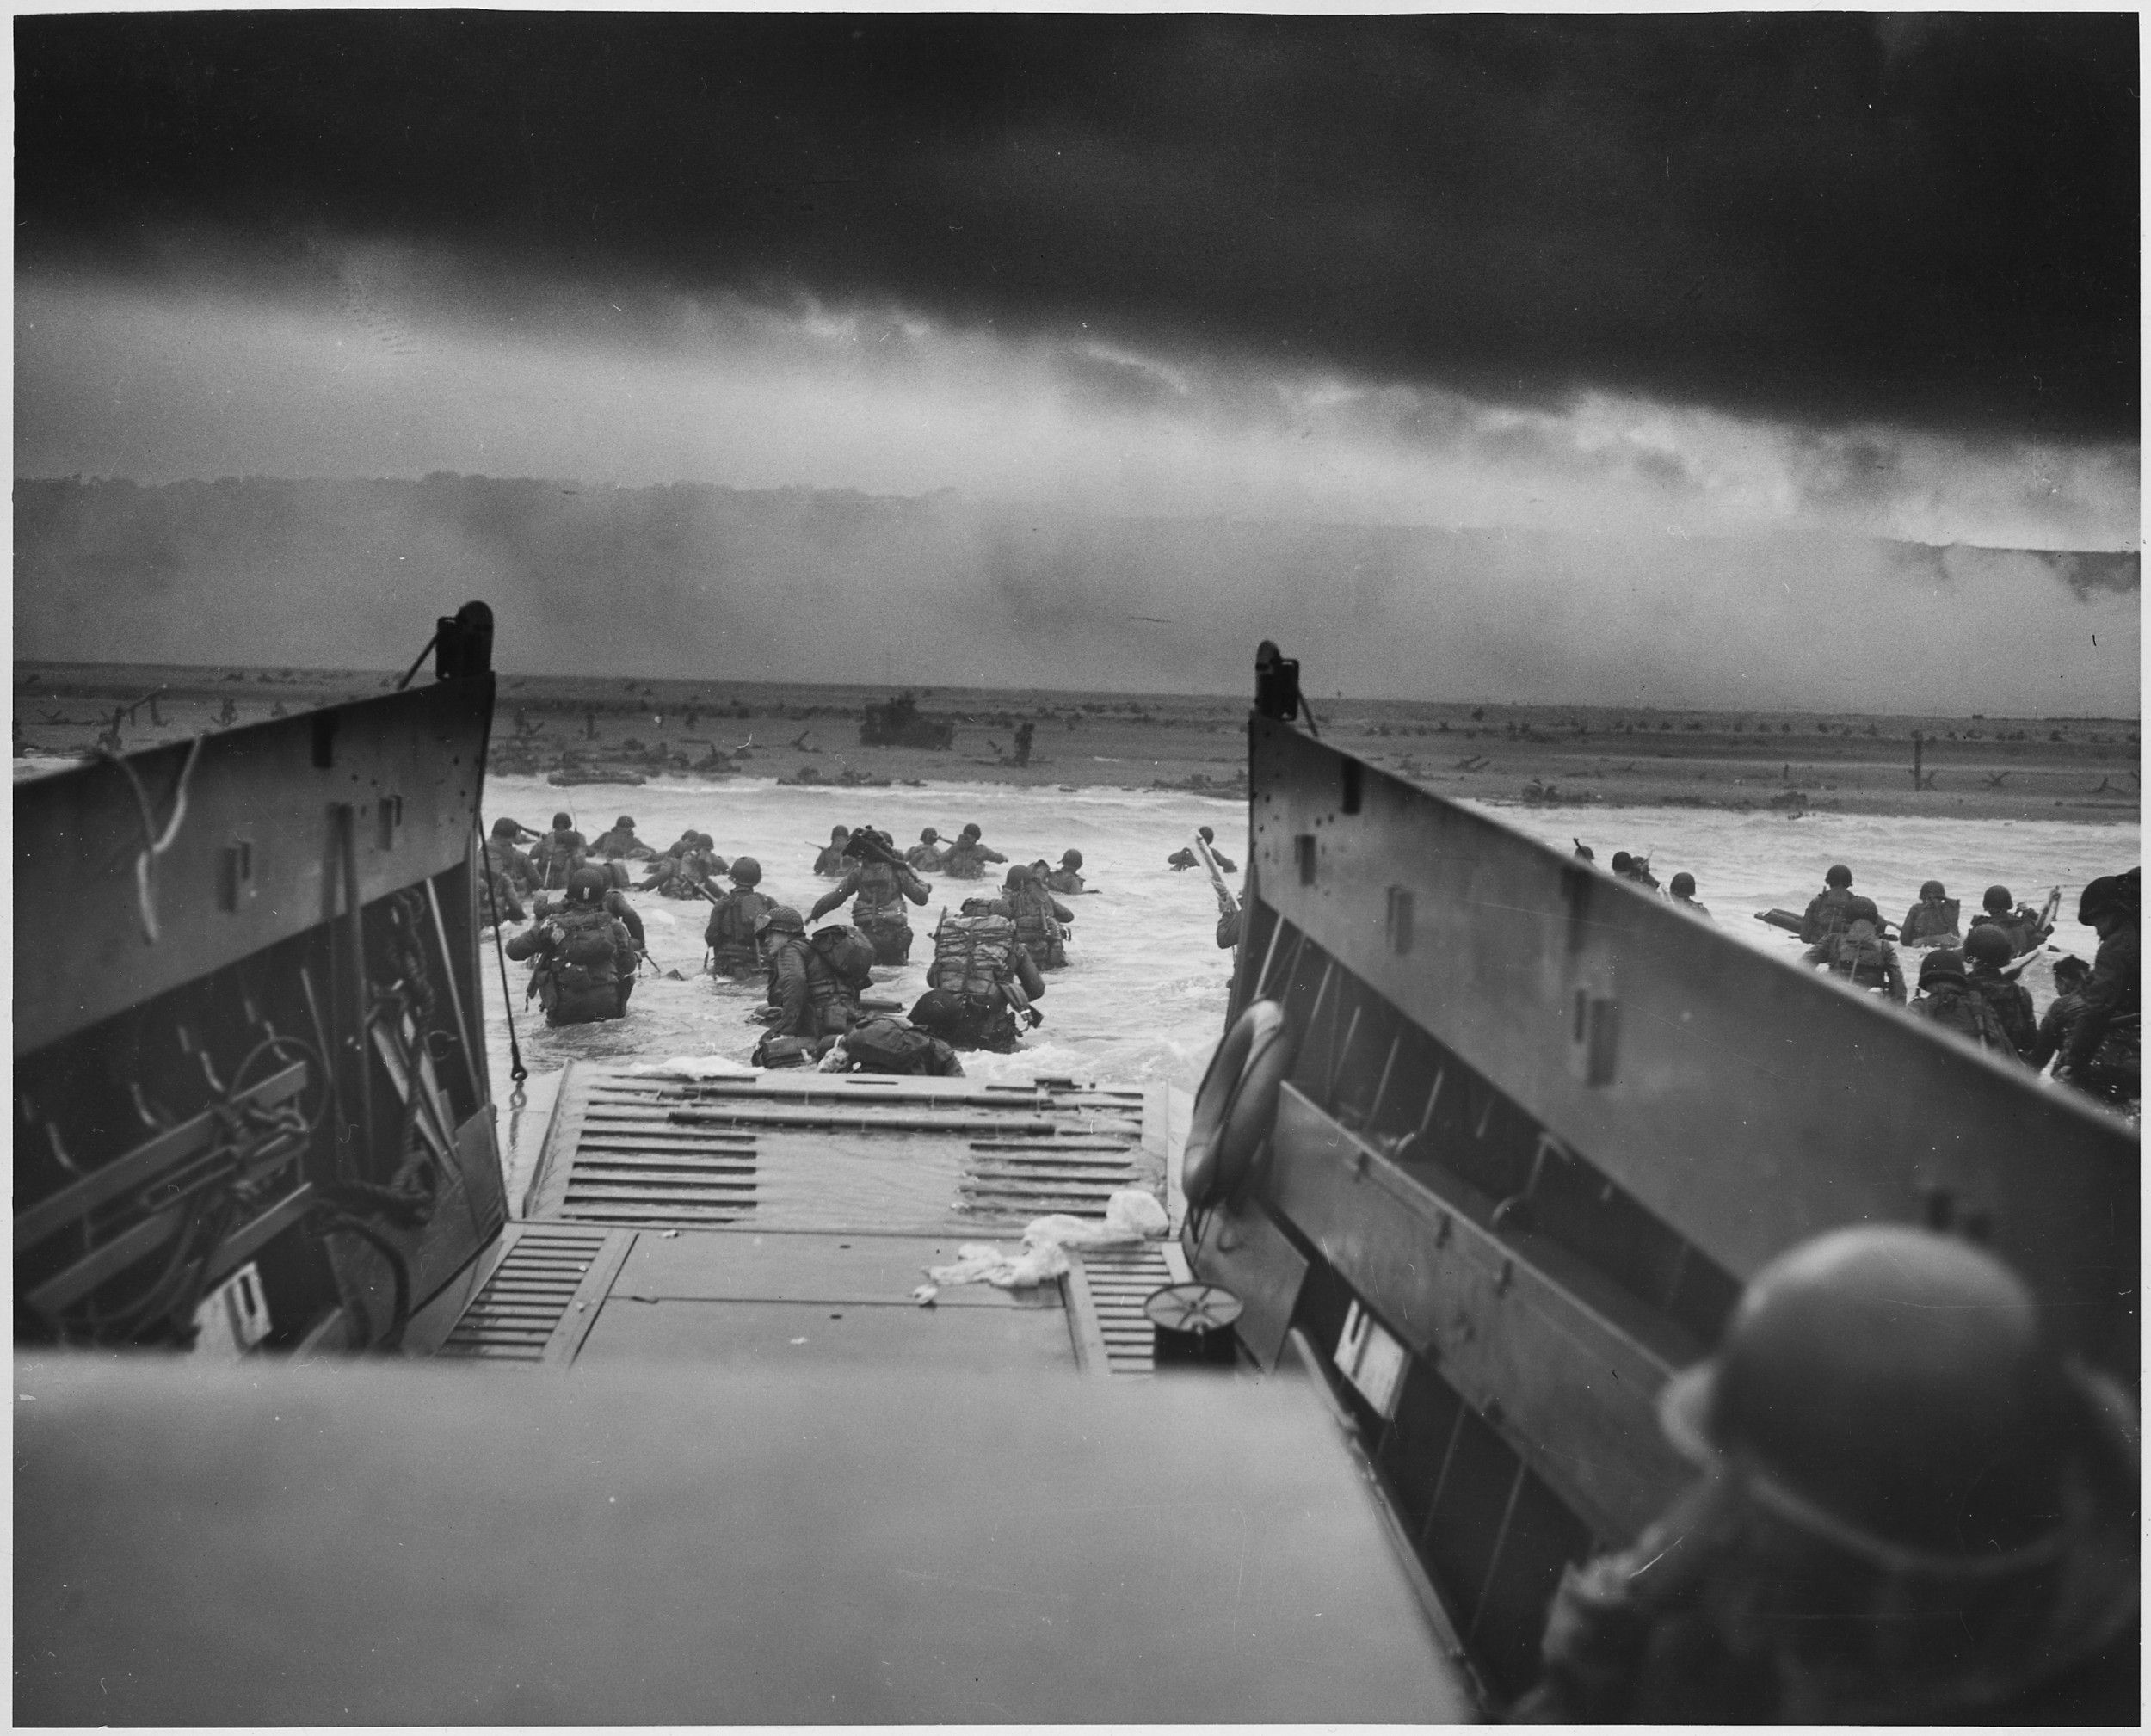 Troops Landing at Normandy